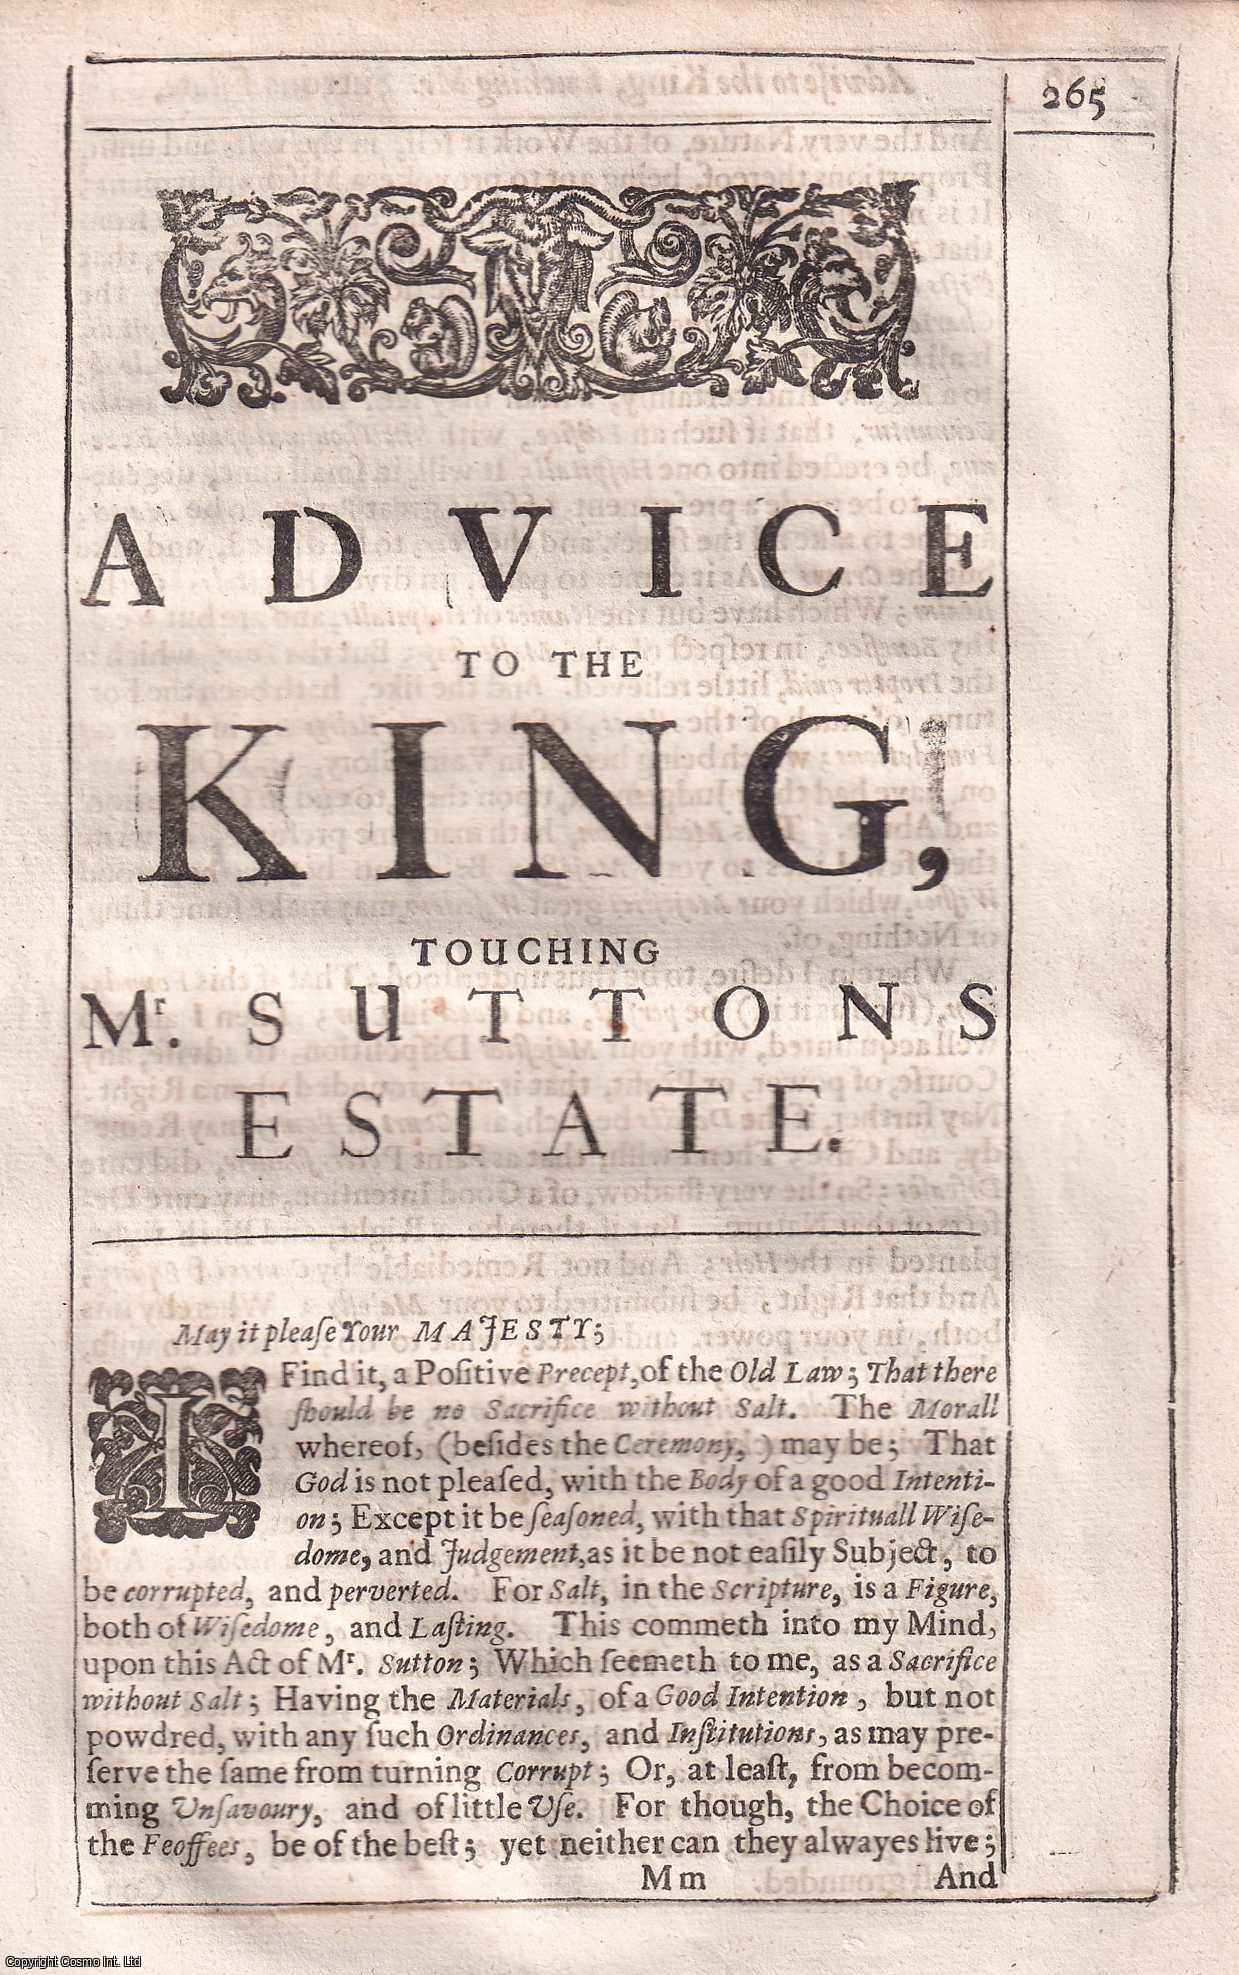 Francis Bacon. Baron of Verulam, Viscount St Alban - 1661 Printing. Advice to The King, touching Mr. Suttons Estate.